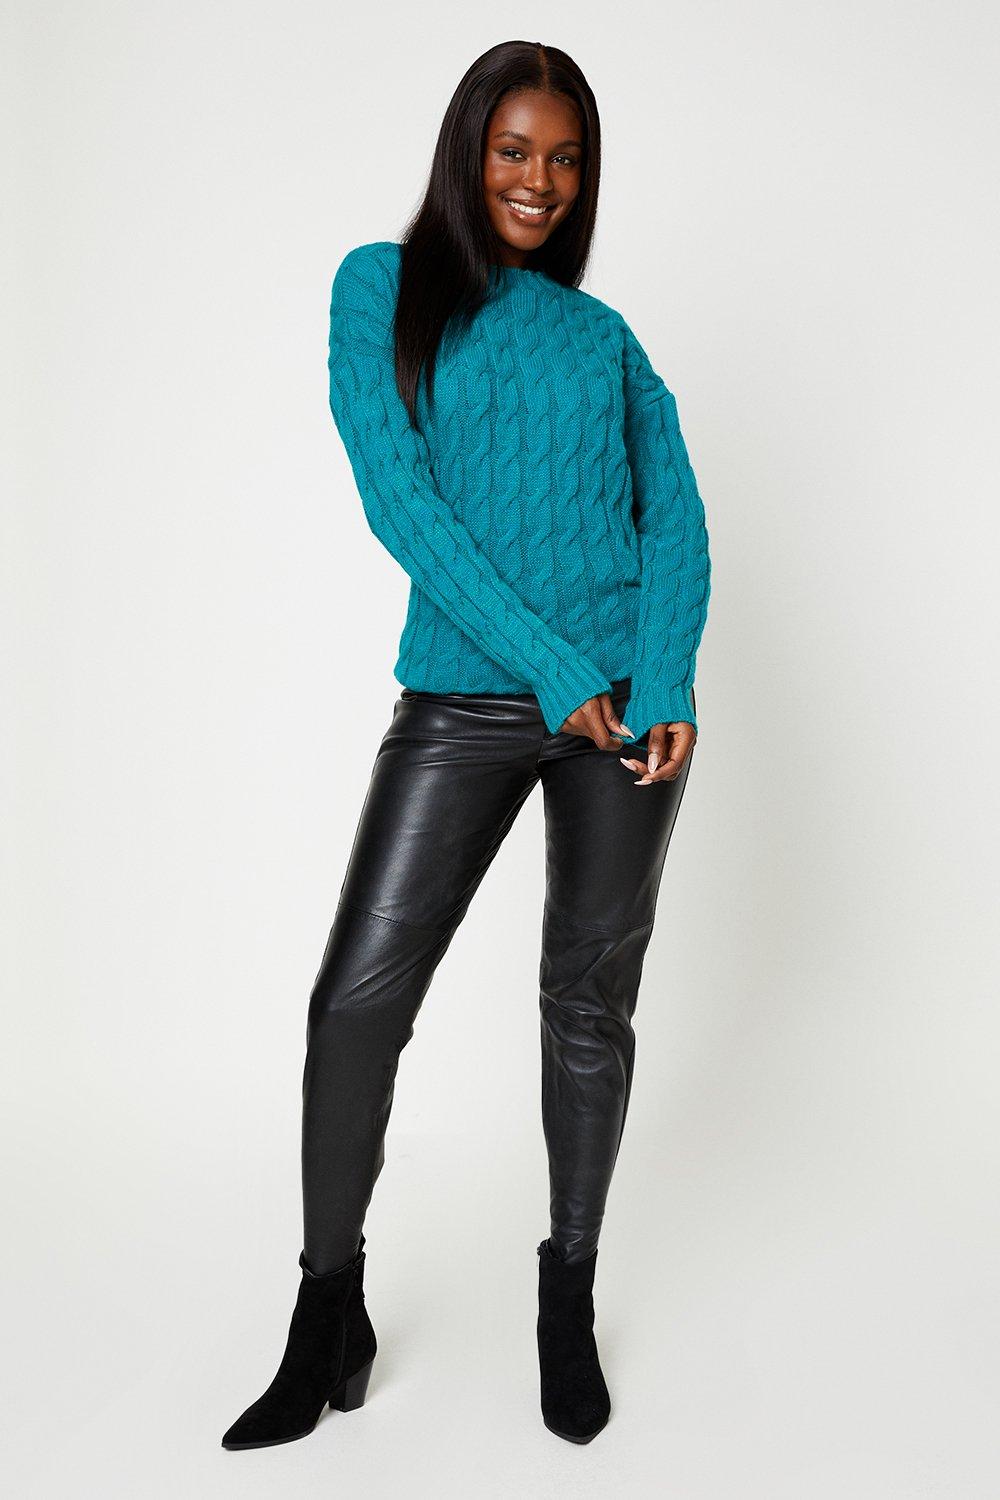 Women’s Long Sleeve Cable Knit Jumper - green - M